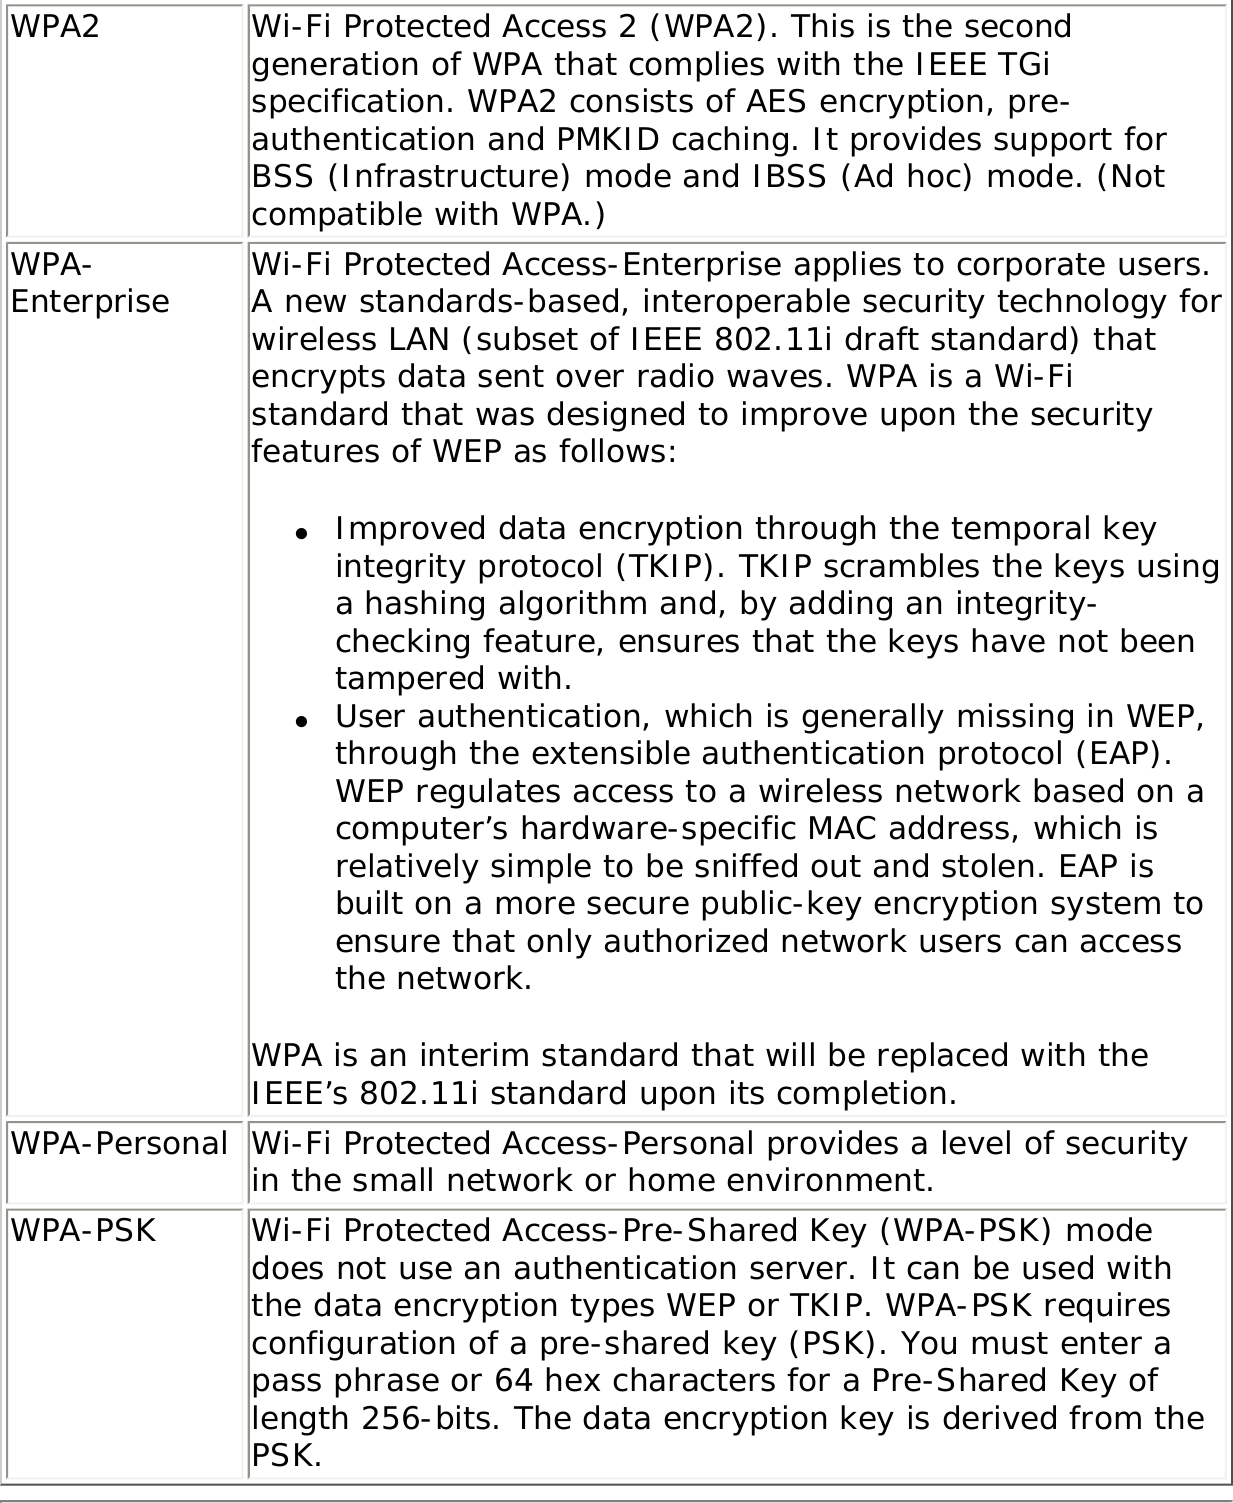 WPA2 Wi-Fi Protected Access 2 (WPA2). This is the second generation of WPA that complies with the IEEE TGi specification. WPA2 consists of AES encryption, pre-authentication and PMKID caching. It provides support for BSS (Infrastructure) mode and IBSS (Ad hoc) mode. (Not compatible with WPA.)WPA-Enterprise Wi-Fi Protected Access-Enterprise applies to corporate users. A new standards-based, interoperable security technology for wireless LAN (subset of IEEE 802.11i draft standard) that encrypts data sent over radio waves. WPA is a Wi-Fi standard that was designed to improve upon the security features of WEP as follows: ●     Improved data encryption through the temporal key integrity protocol (TKIP). TKIP scrambles the keys using a hashing algorithm and, by adding an integrity-checking feature, ensures that the keys have not been tampered with.   ●     User authentication, which is generally missing in WEP, through the extensible authentication protocol (EAP). WEP regulates access to a wireless network based on a computer’s hardware-specific MAC address, which is relatively simple to be sniffed out and stolen. EAP is built on a more secure public-key encryption system to ensure that only authorized network users can access the network. WPA is an interim standard that will be replaced with the IEEE’s 802.11i standard upon its completion.WPA-Personal Wi-Fi Protected Access-Personal provides a level of security in the small network or home environment. WPA-PSK Wi-Fi Protected Access-Pre-Shared Key (WPA-PSK) mode does not use an authentication server. It can be used with the data encryption types WEP or TKIP. WPA-PSK requires configuration of a pre-shared key (PSK). You must enter a pass phrase or 64 hex characters for a Pre-Shared Key of length 256-bits. The data encryption key is derived from the PSK.